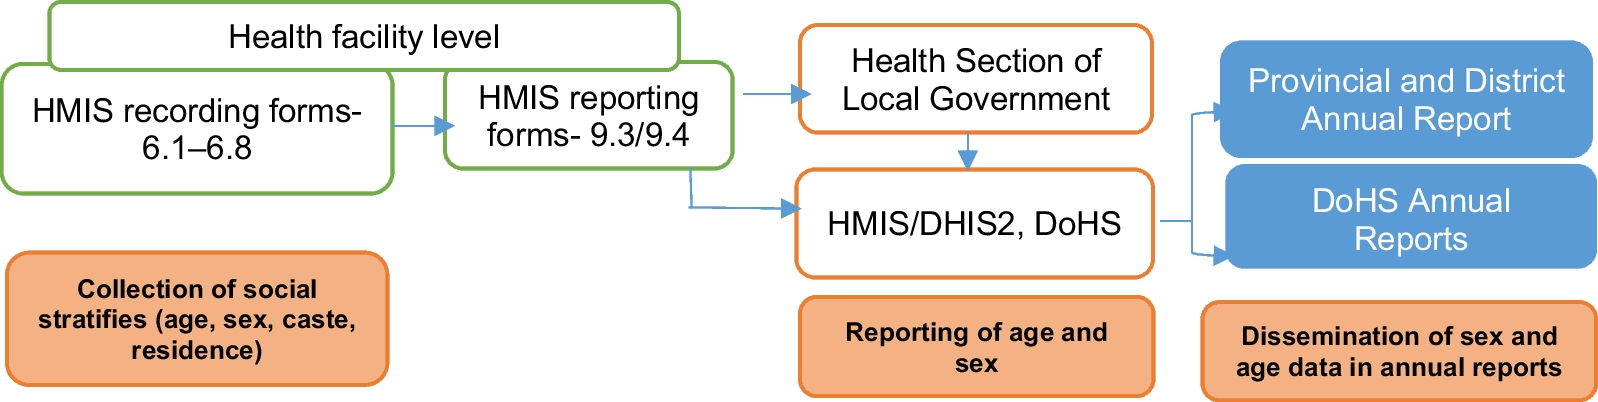 Assessing intersectional gender analysis in Nepal’s health management information system: a case study on tuberculosis for inclusive health systems